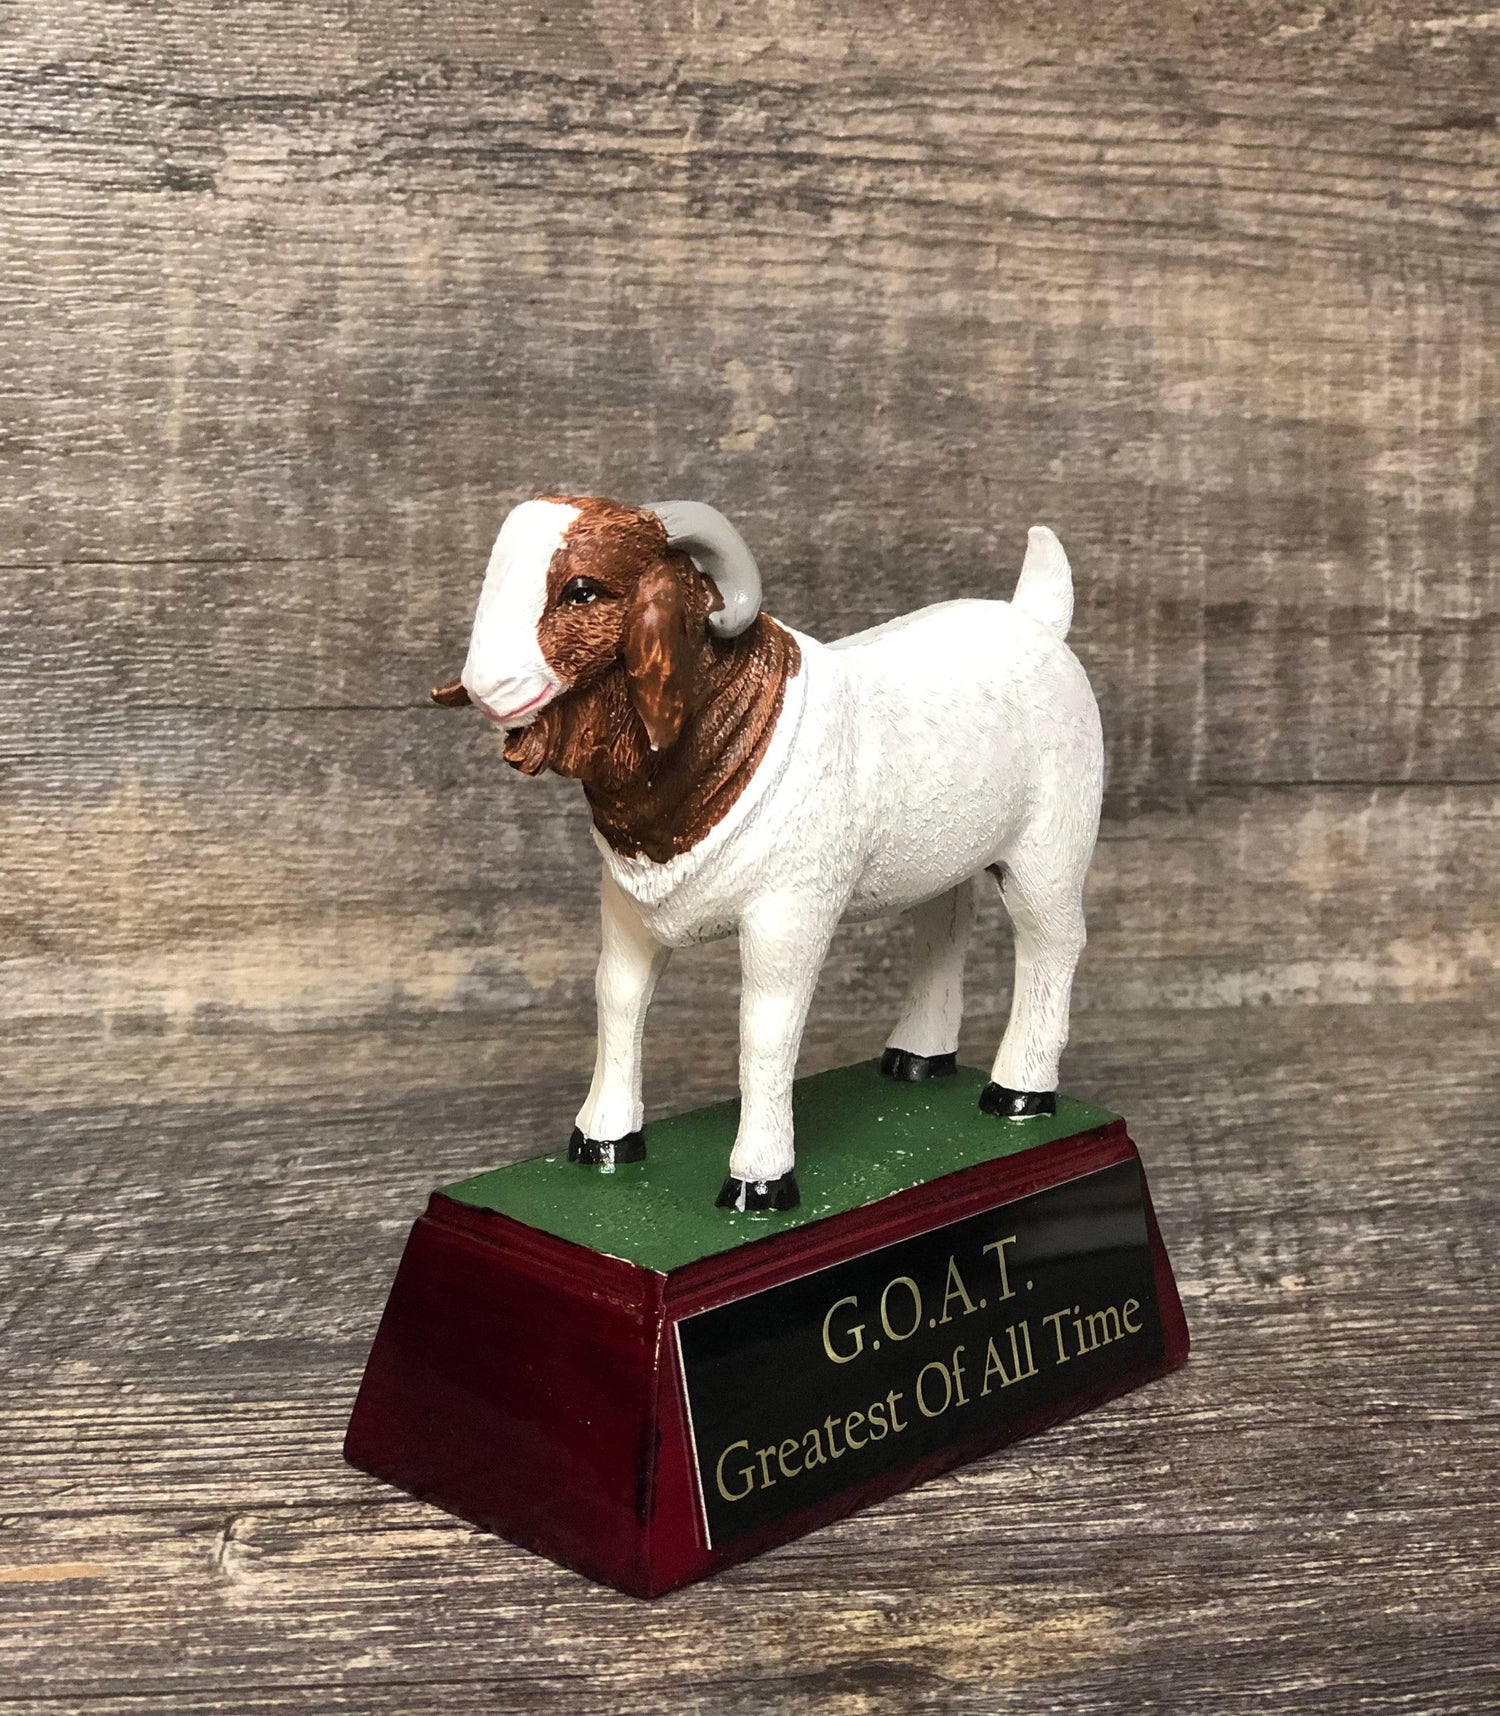 Fantasy Football Trophy Funny GOAT Greatest of All Time Award Bragging Rights Best Stats Top Score Achievement Award Personalize Winner